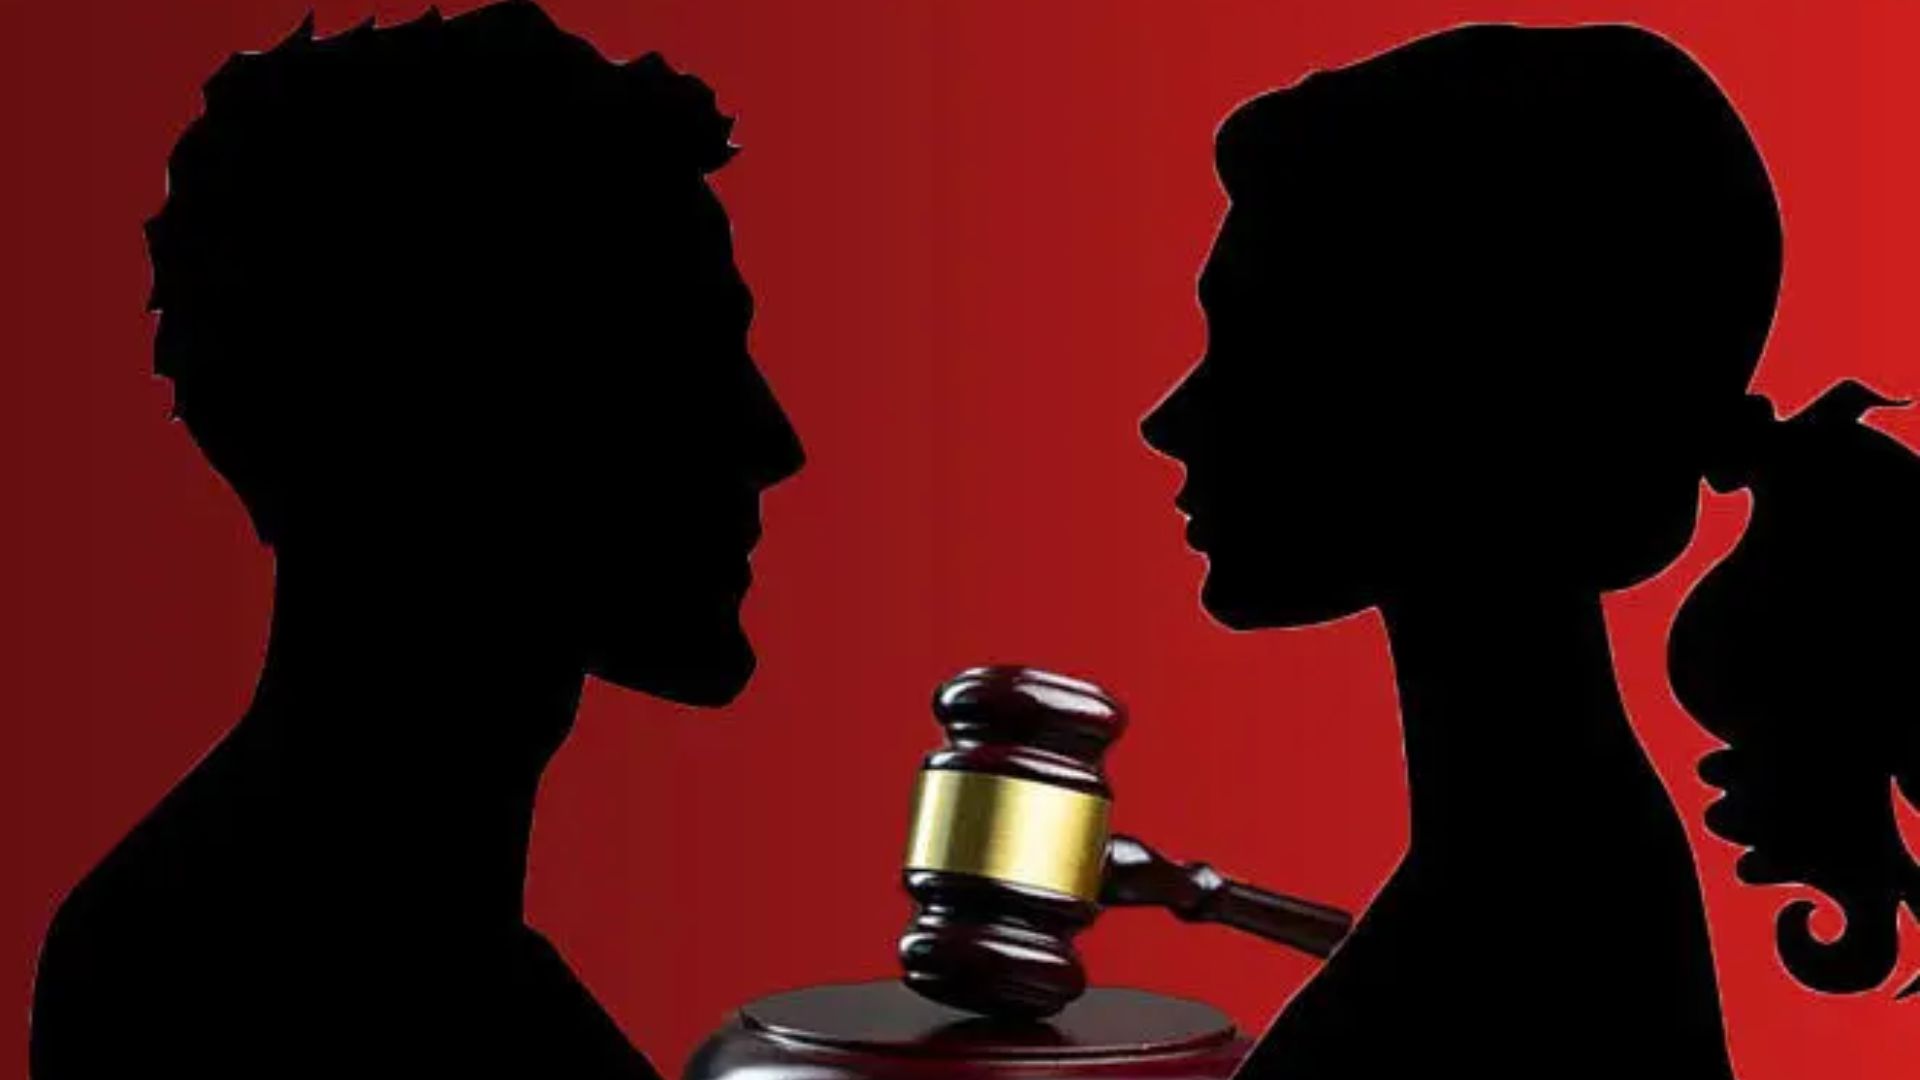 Husband Comparing Wife To Other Women Amounts To Mental Cruelty, Says Kerala HC. When Will We Stop Pitting Women Against Each Other?